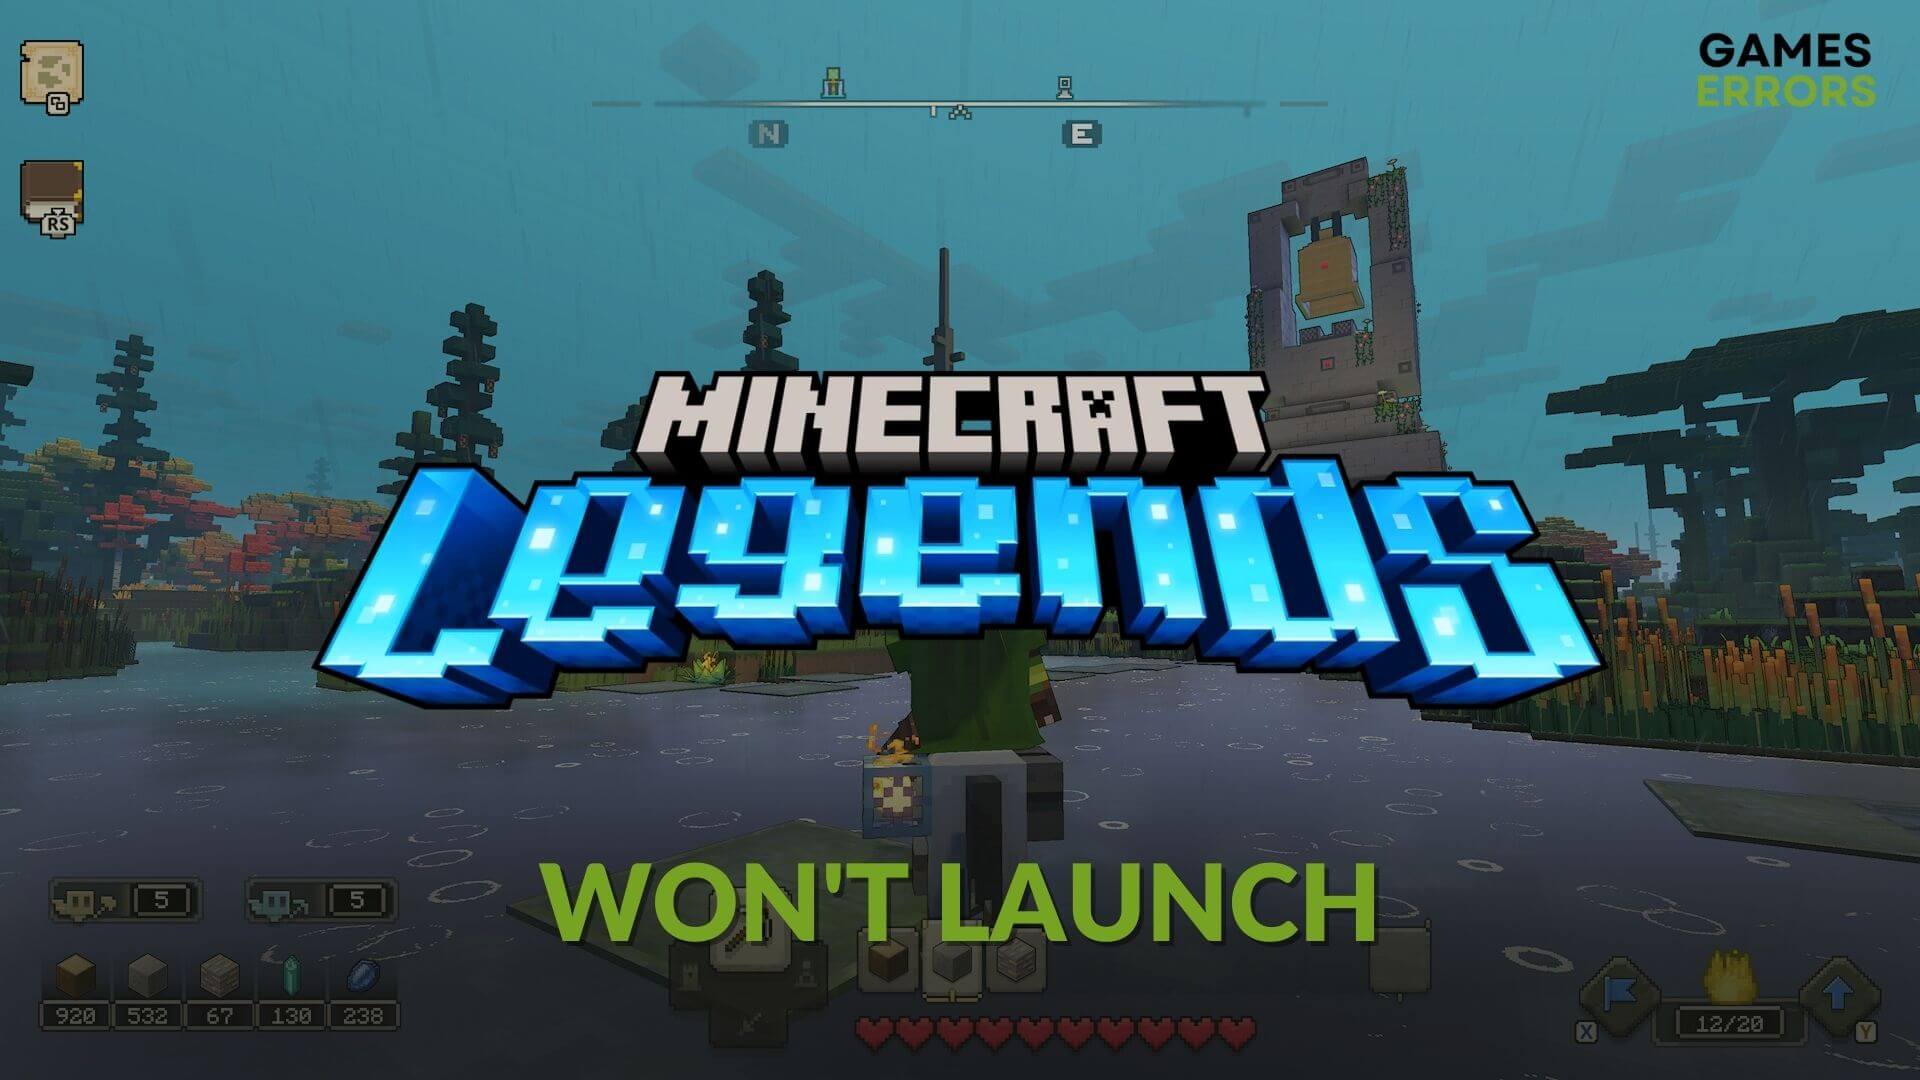 How to fix Minecraft Legends won't launch